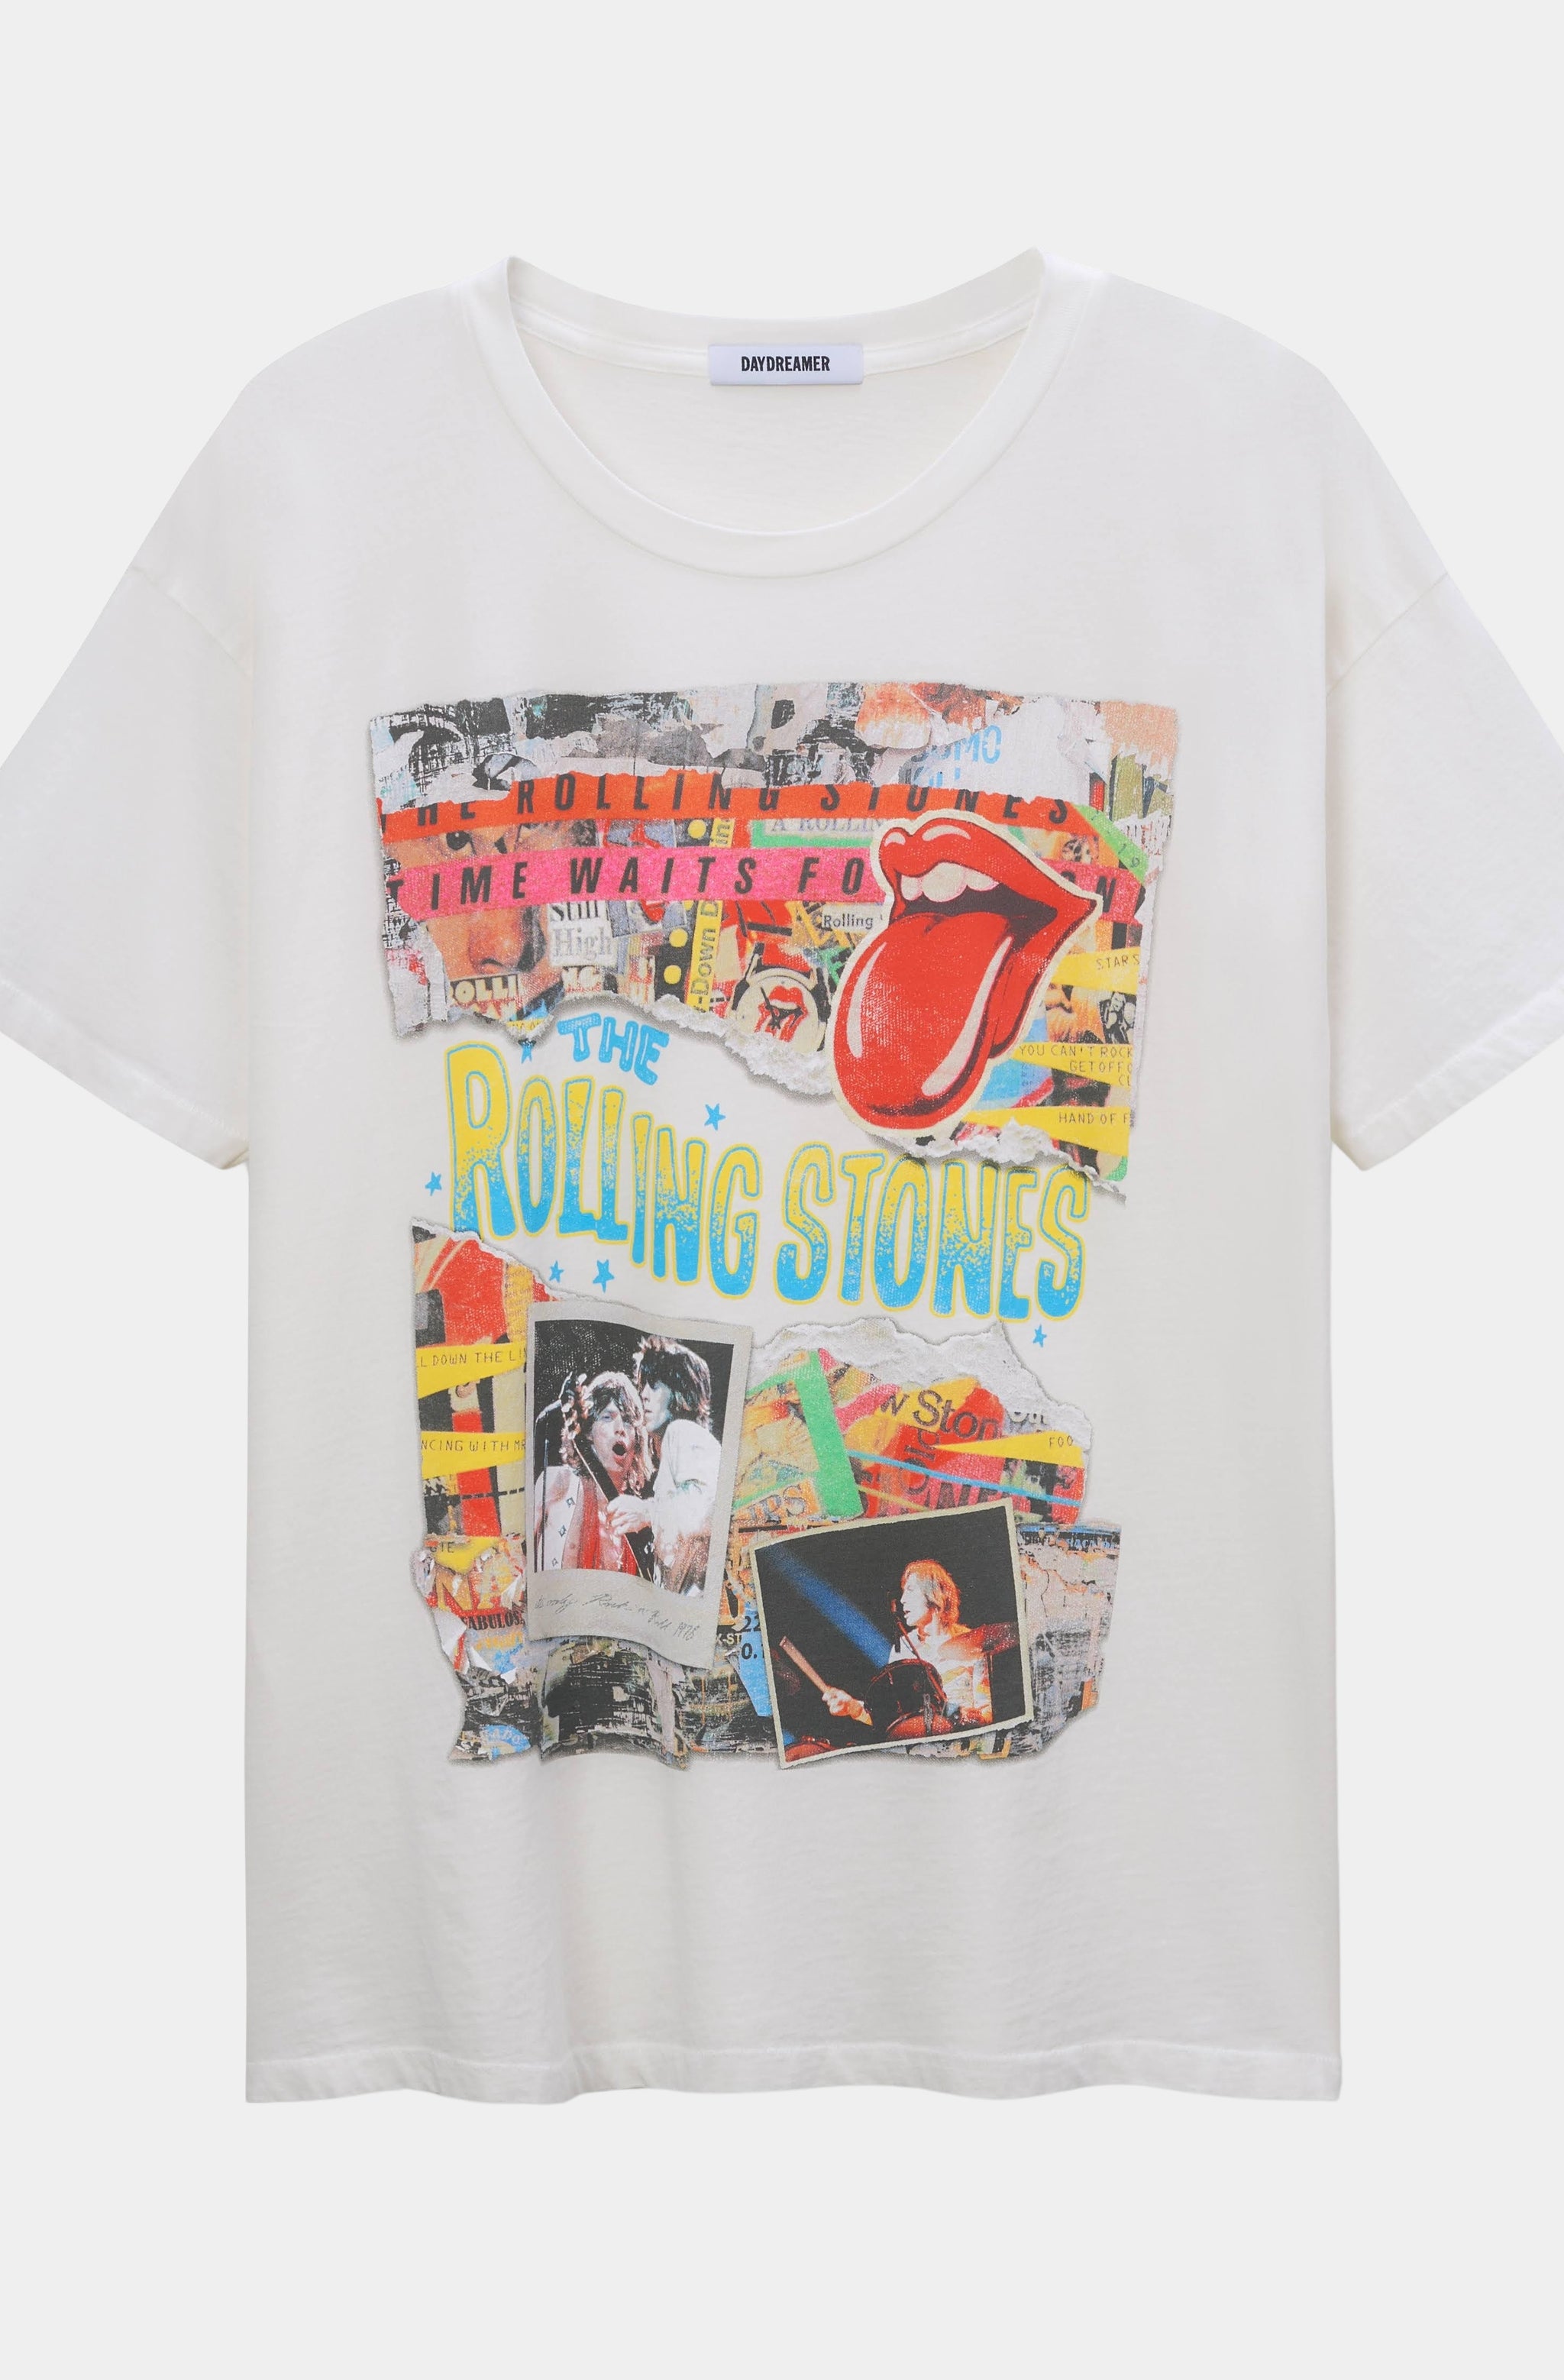 Rolling Stones Time Waits For No One Merch Tee